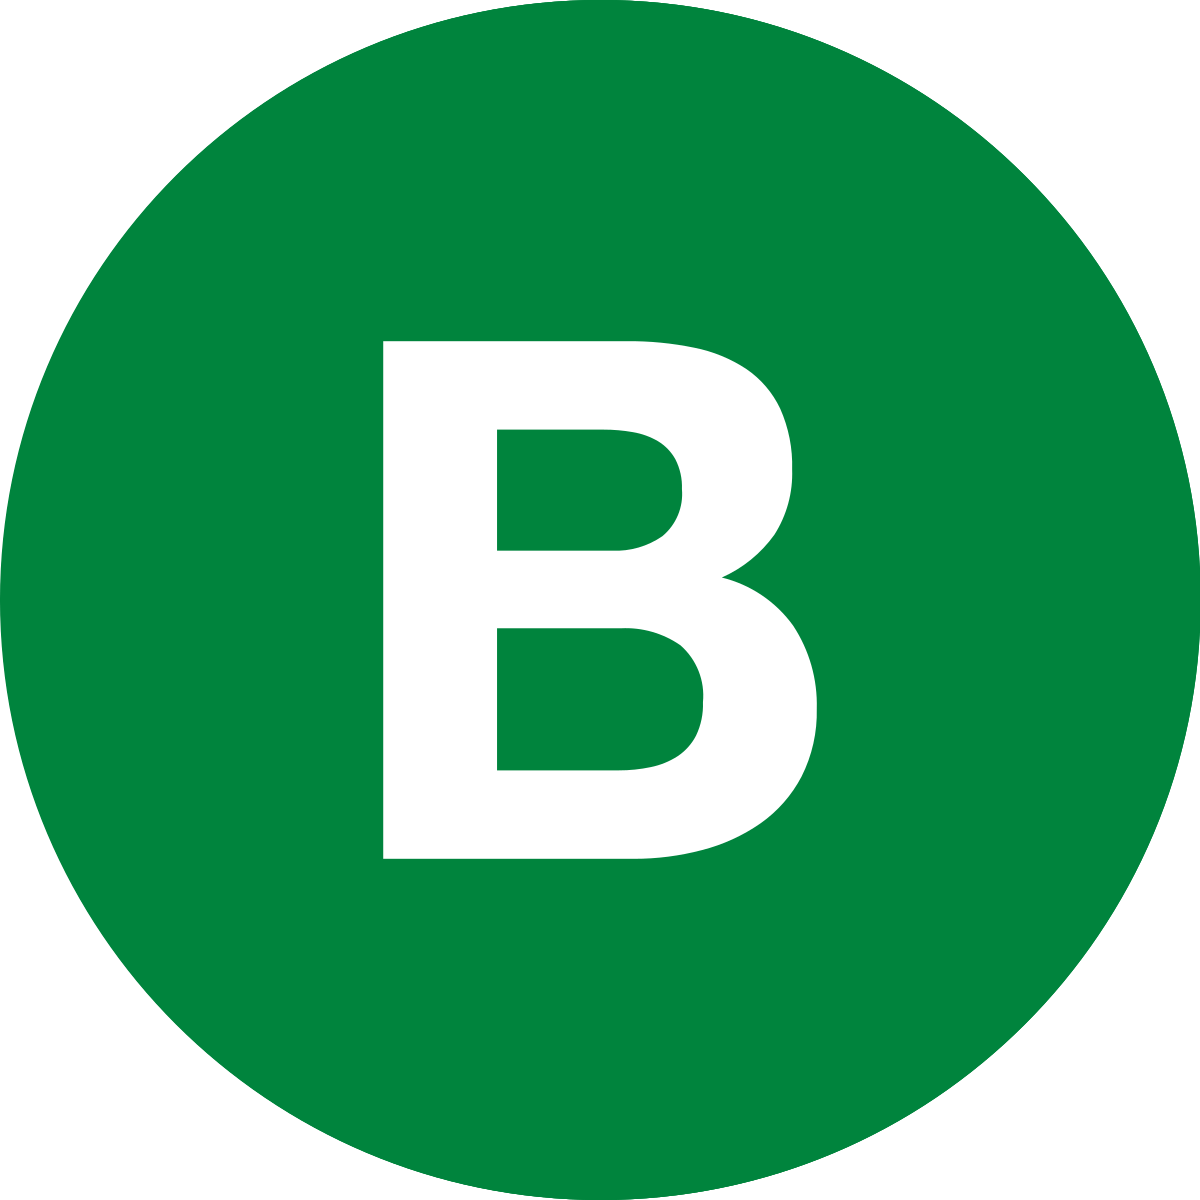 https://upload.wikimedia.org/wikipedia/commons/thumb/2/2f/Icon-green-line-b-default.svg/1200px-Icon-green-line-b-default.svg.png